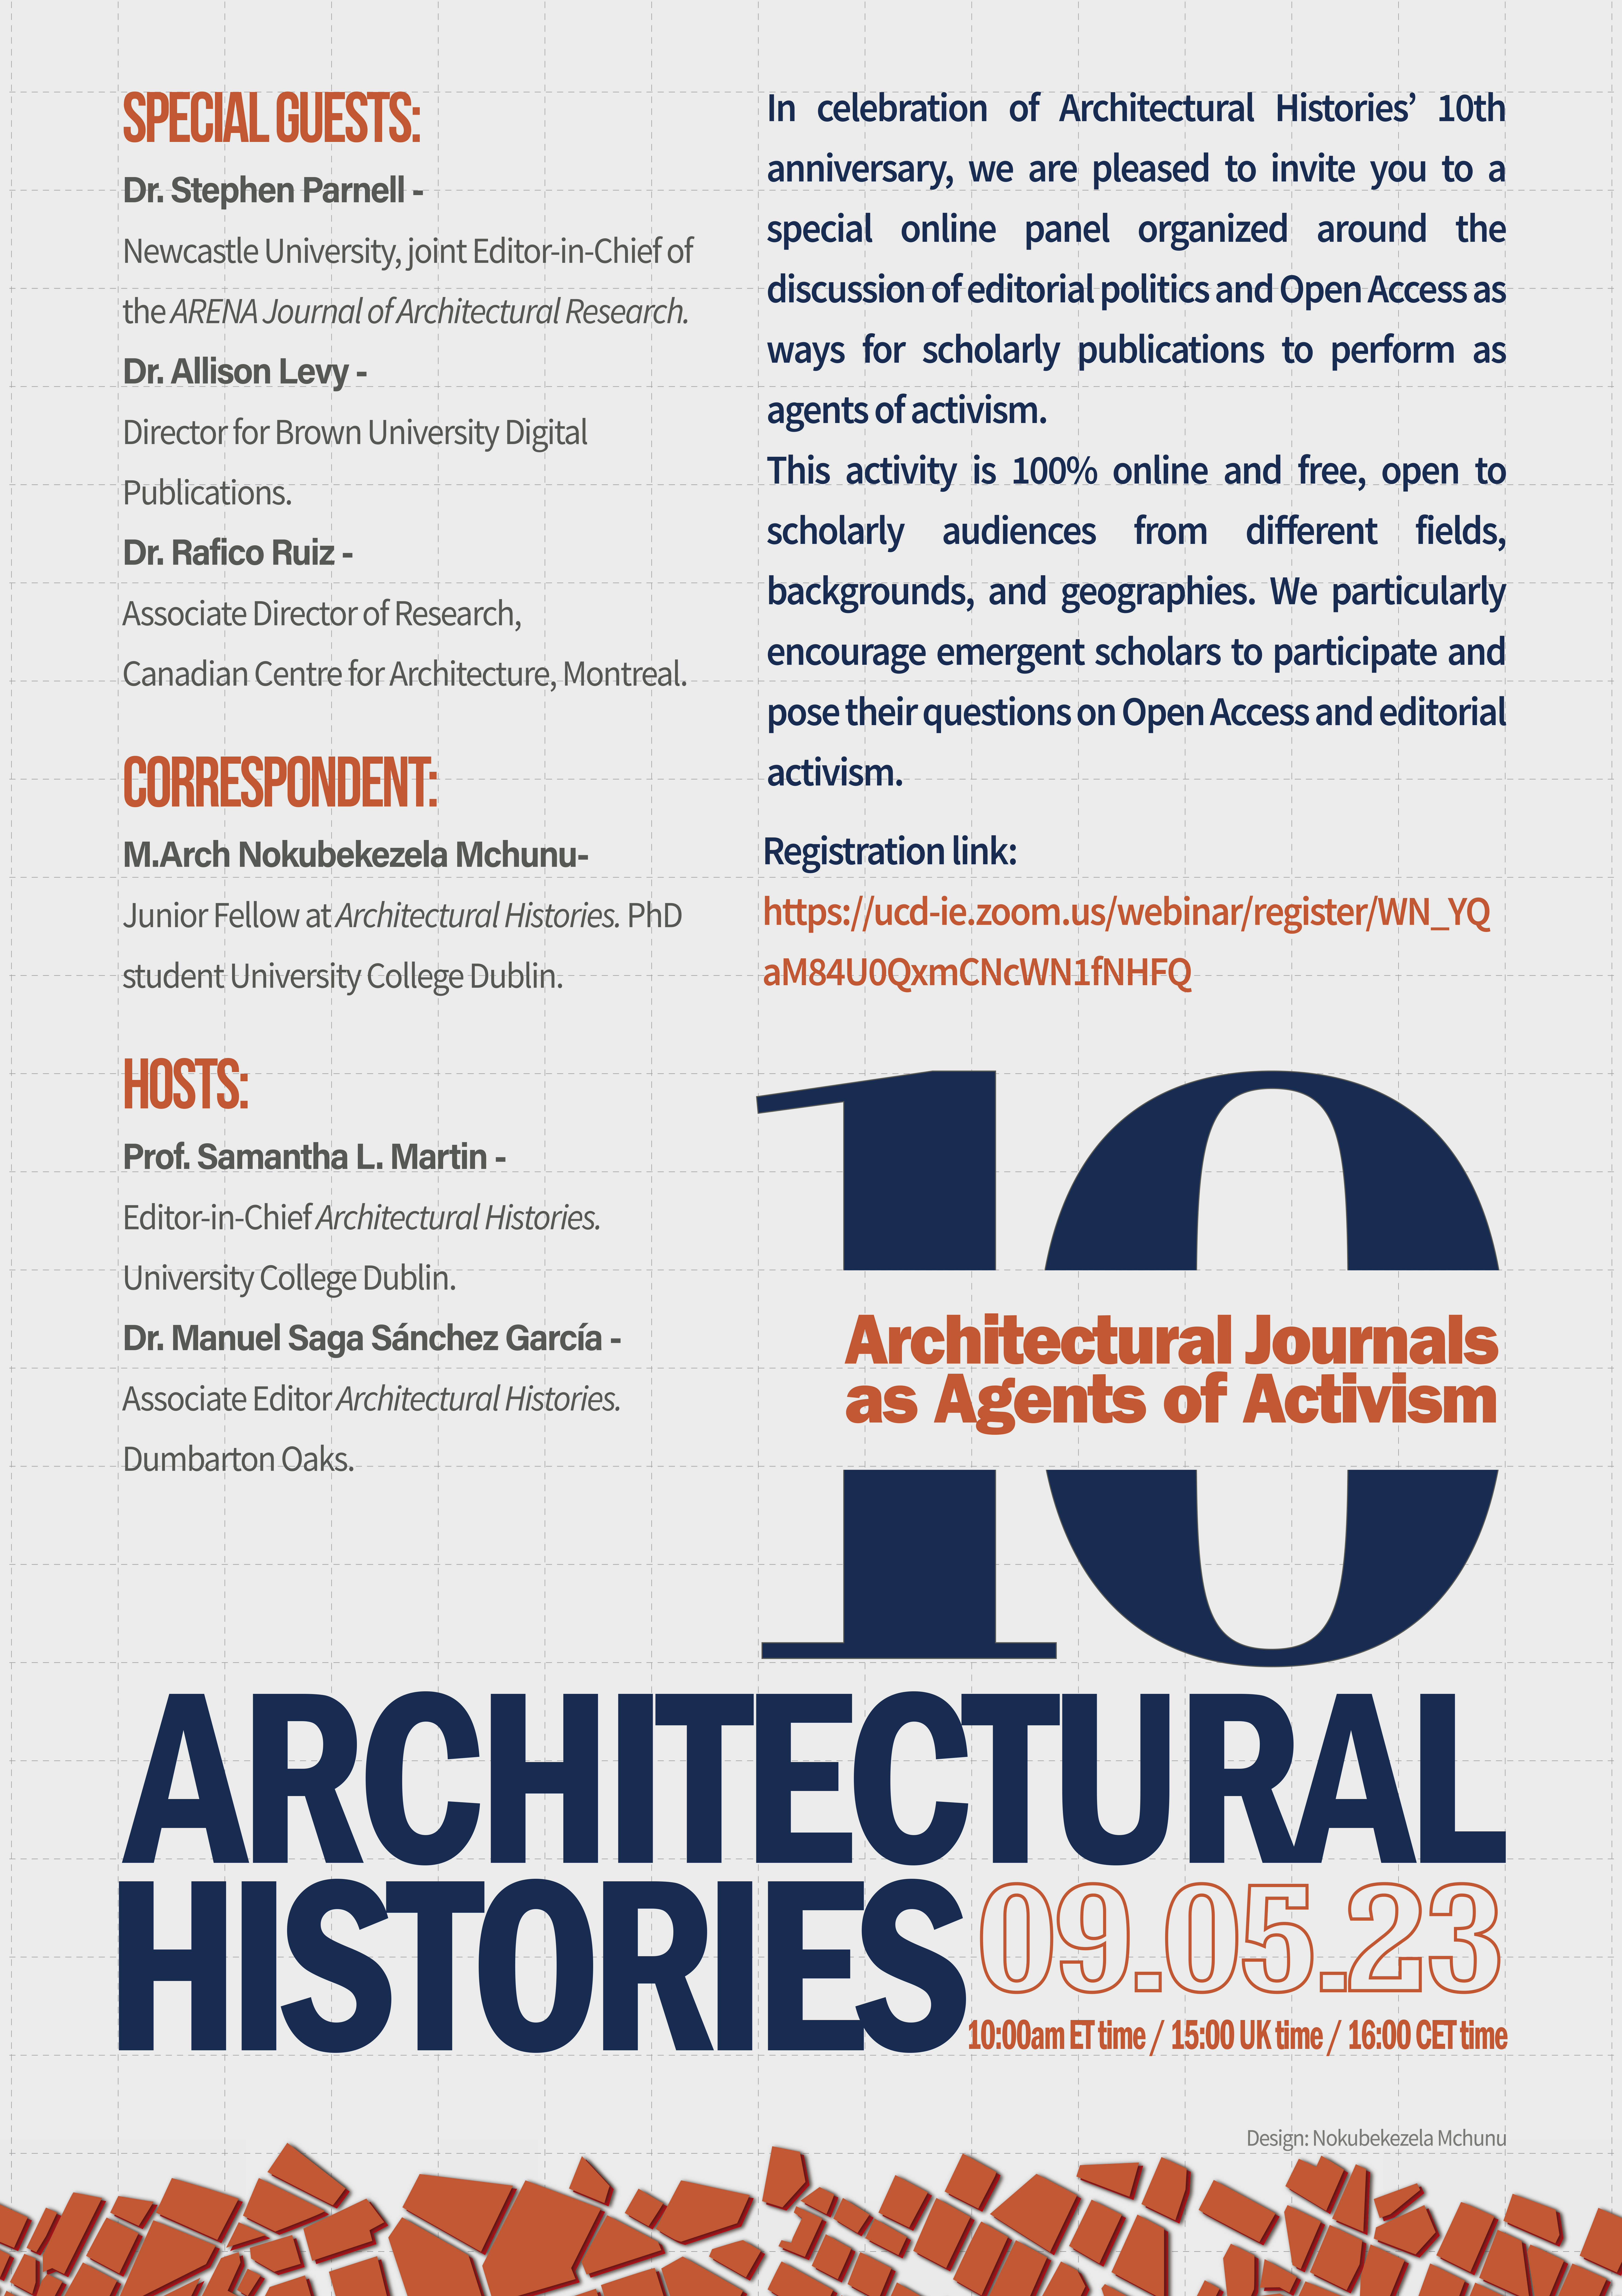 Architectural Histories’ 10th Anniversary Roundtable: Agents of Activism